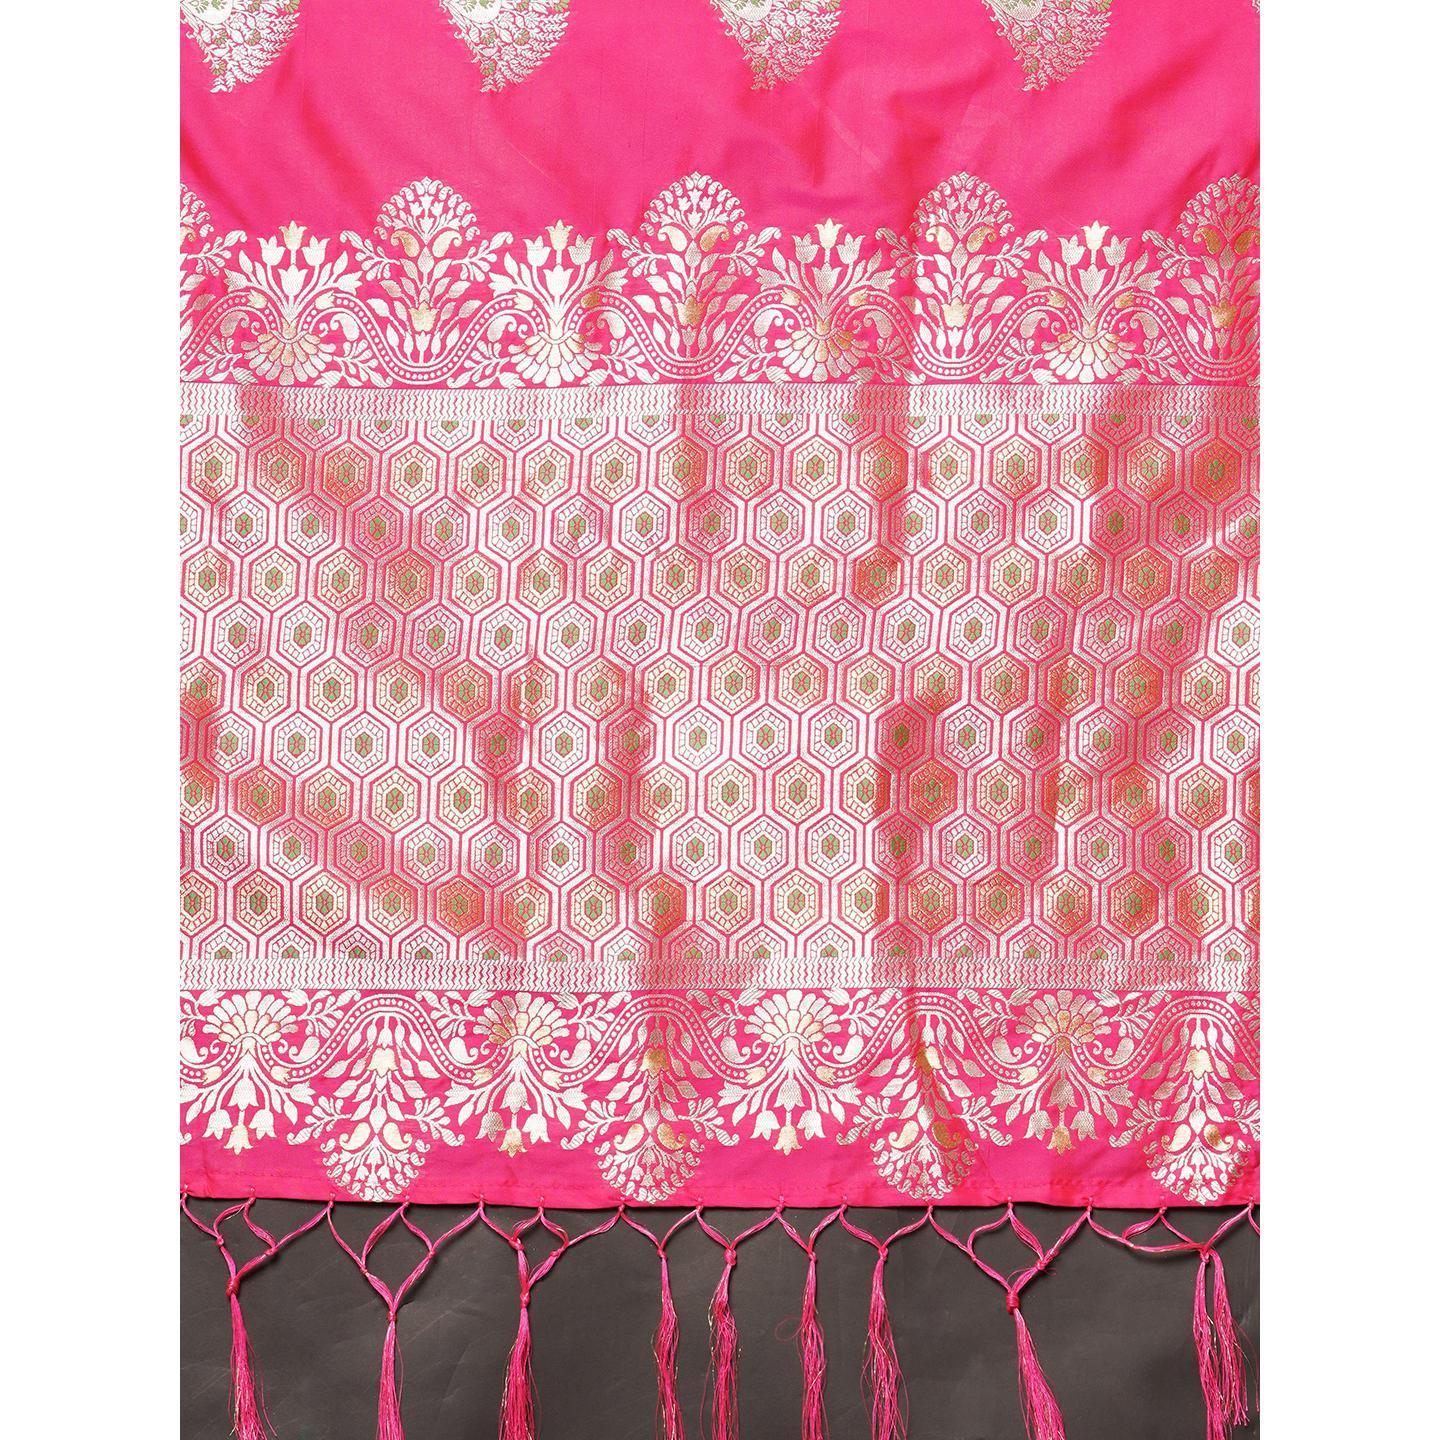 Saree Mall Pink Festive Wear Silk Blend Abstract Designer Woven Border Saree With Unstitched Blouse - Peachmode